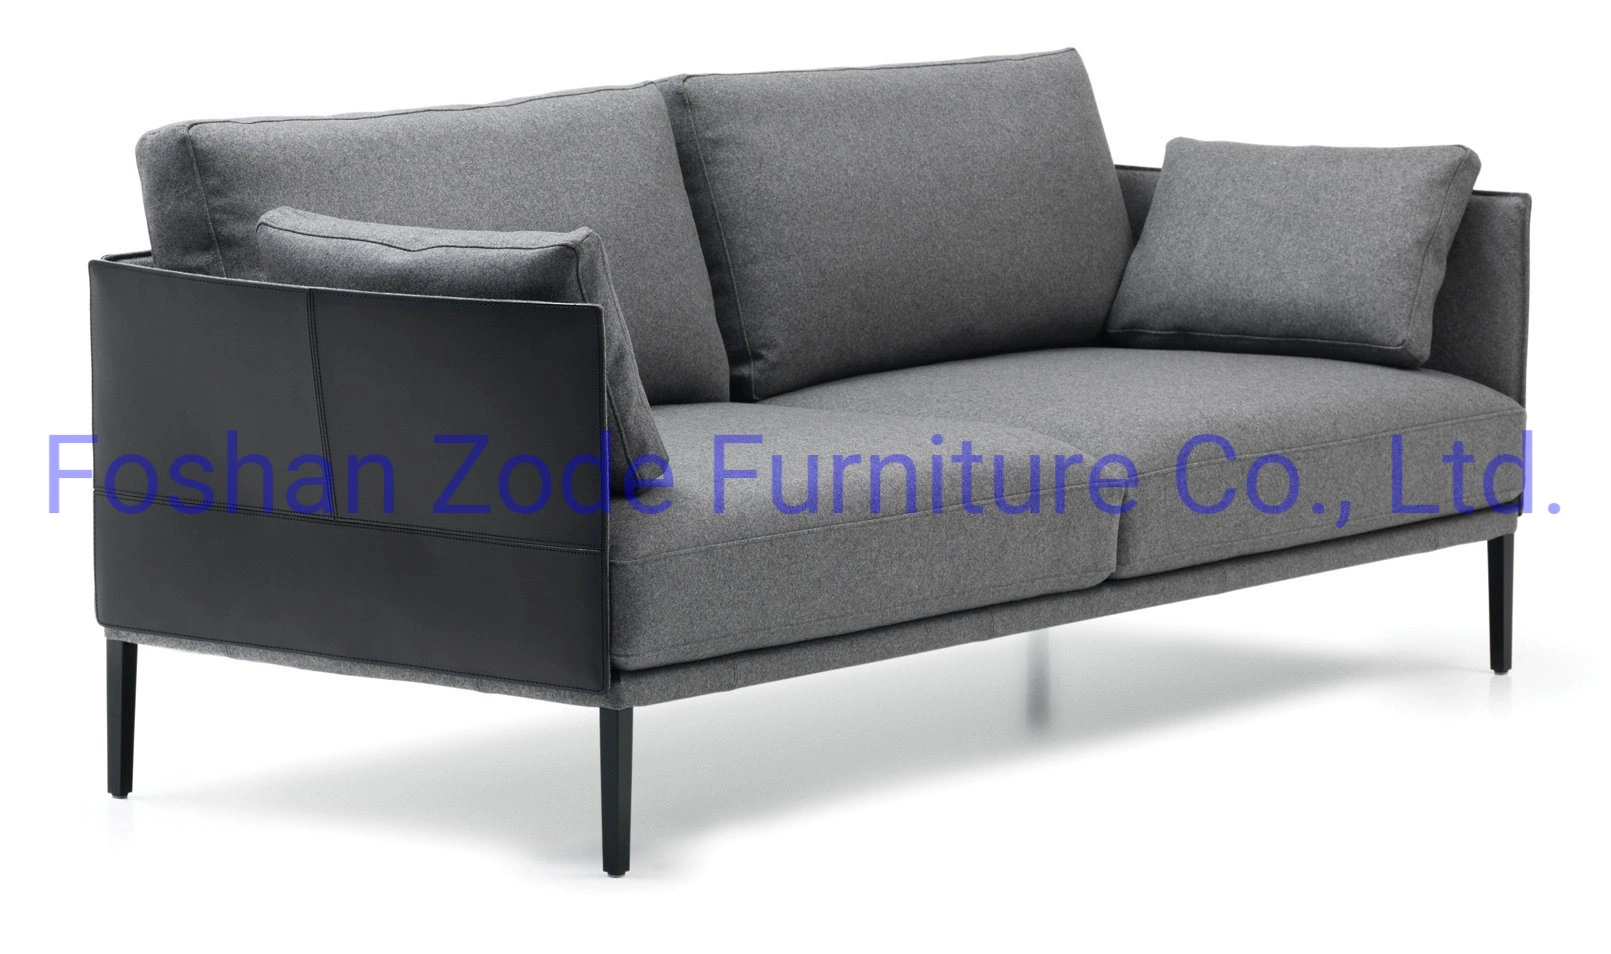 Zode Nordic Modern Design Fabric Reclining Sofa Bed Chair Home Furniture Genuine Leather Sofa Set